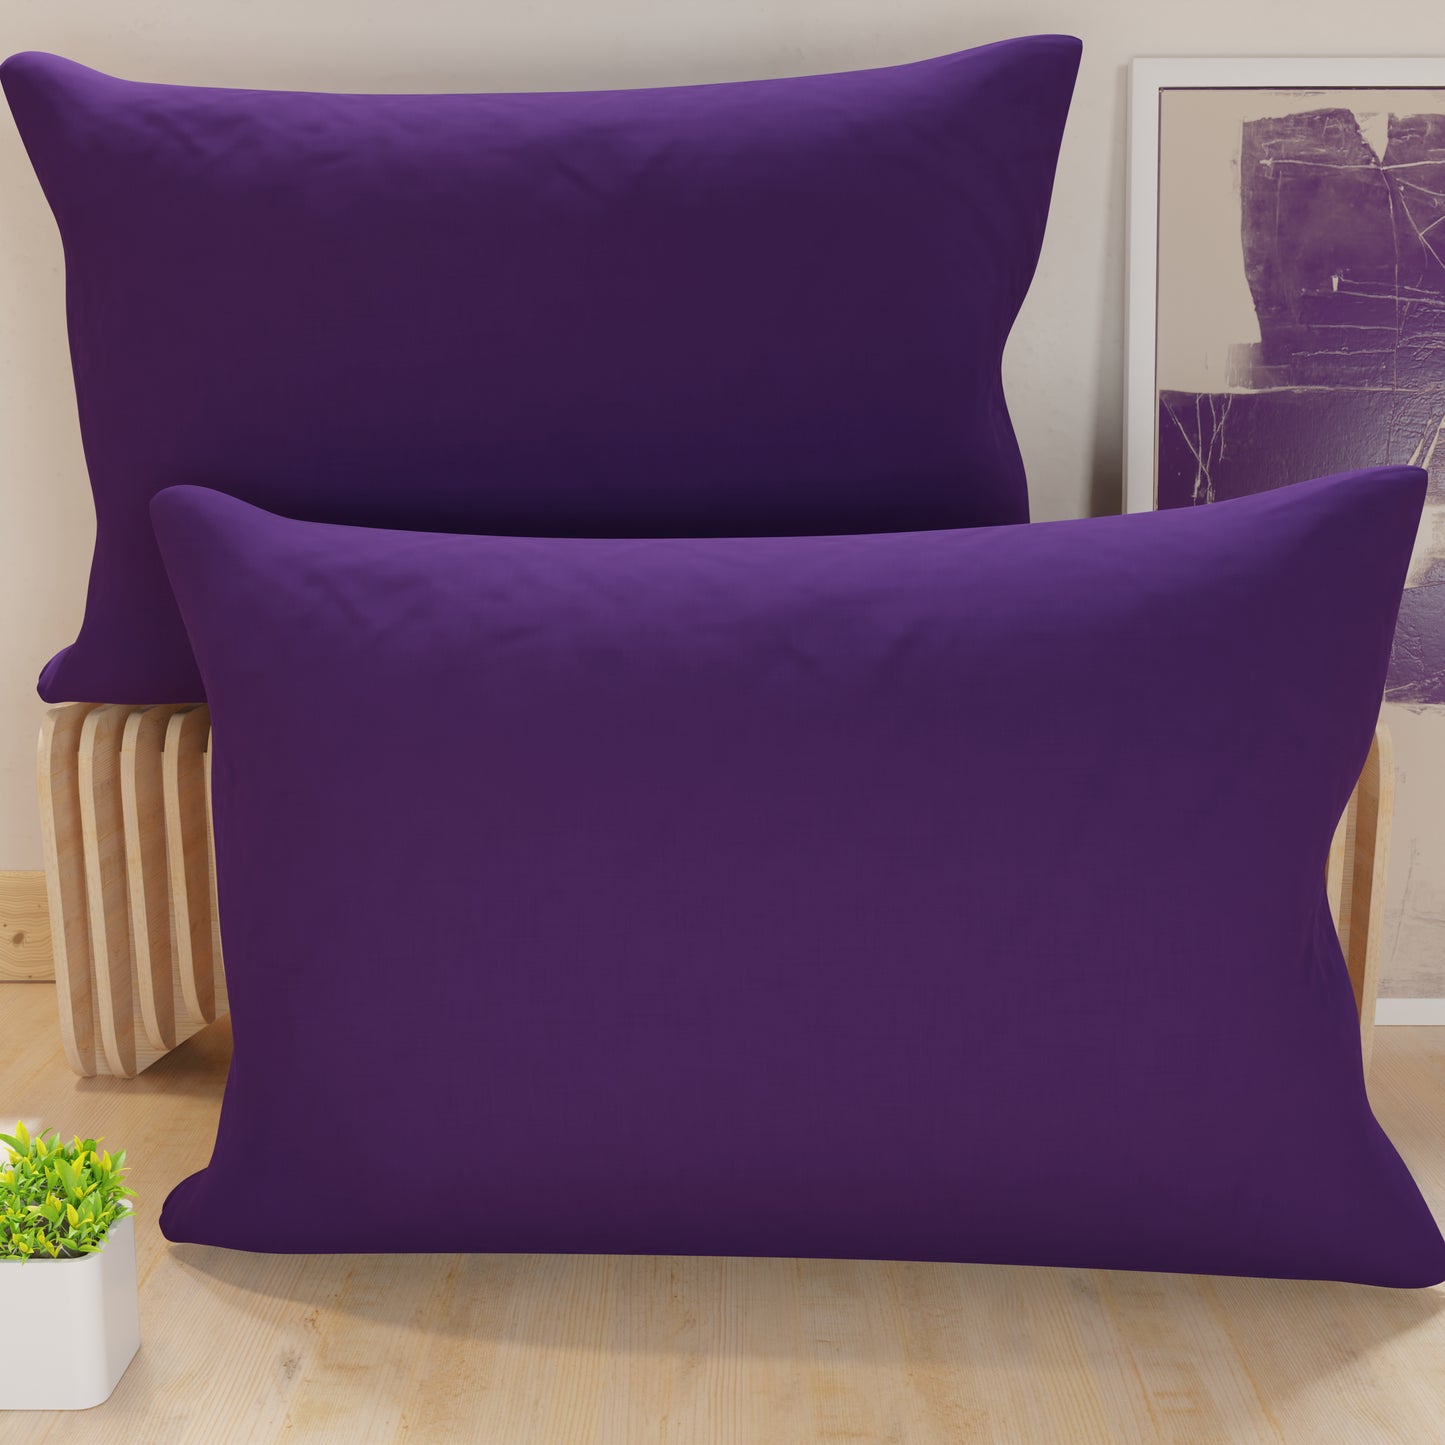 Pillowcases, Pair of Pillowcases, Cushion Covers, 100% Hypoallergenic Microfibre, Purple